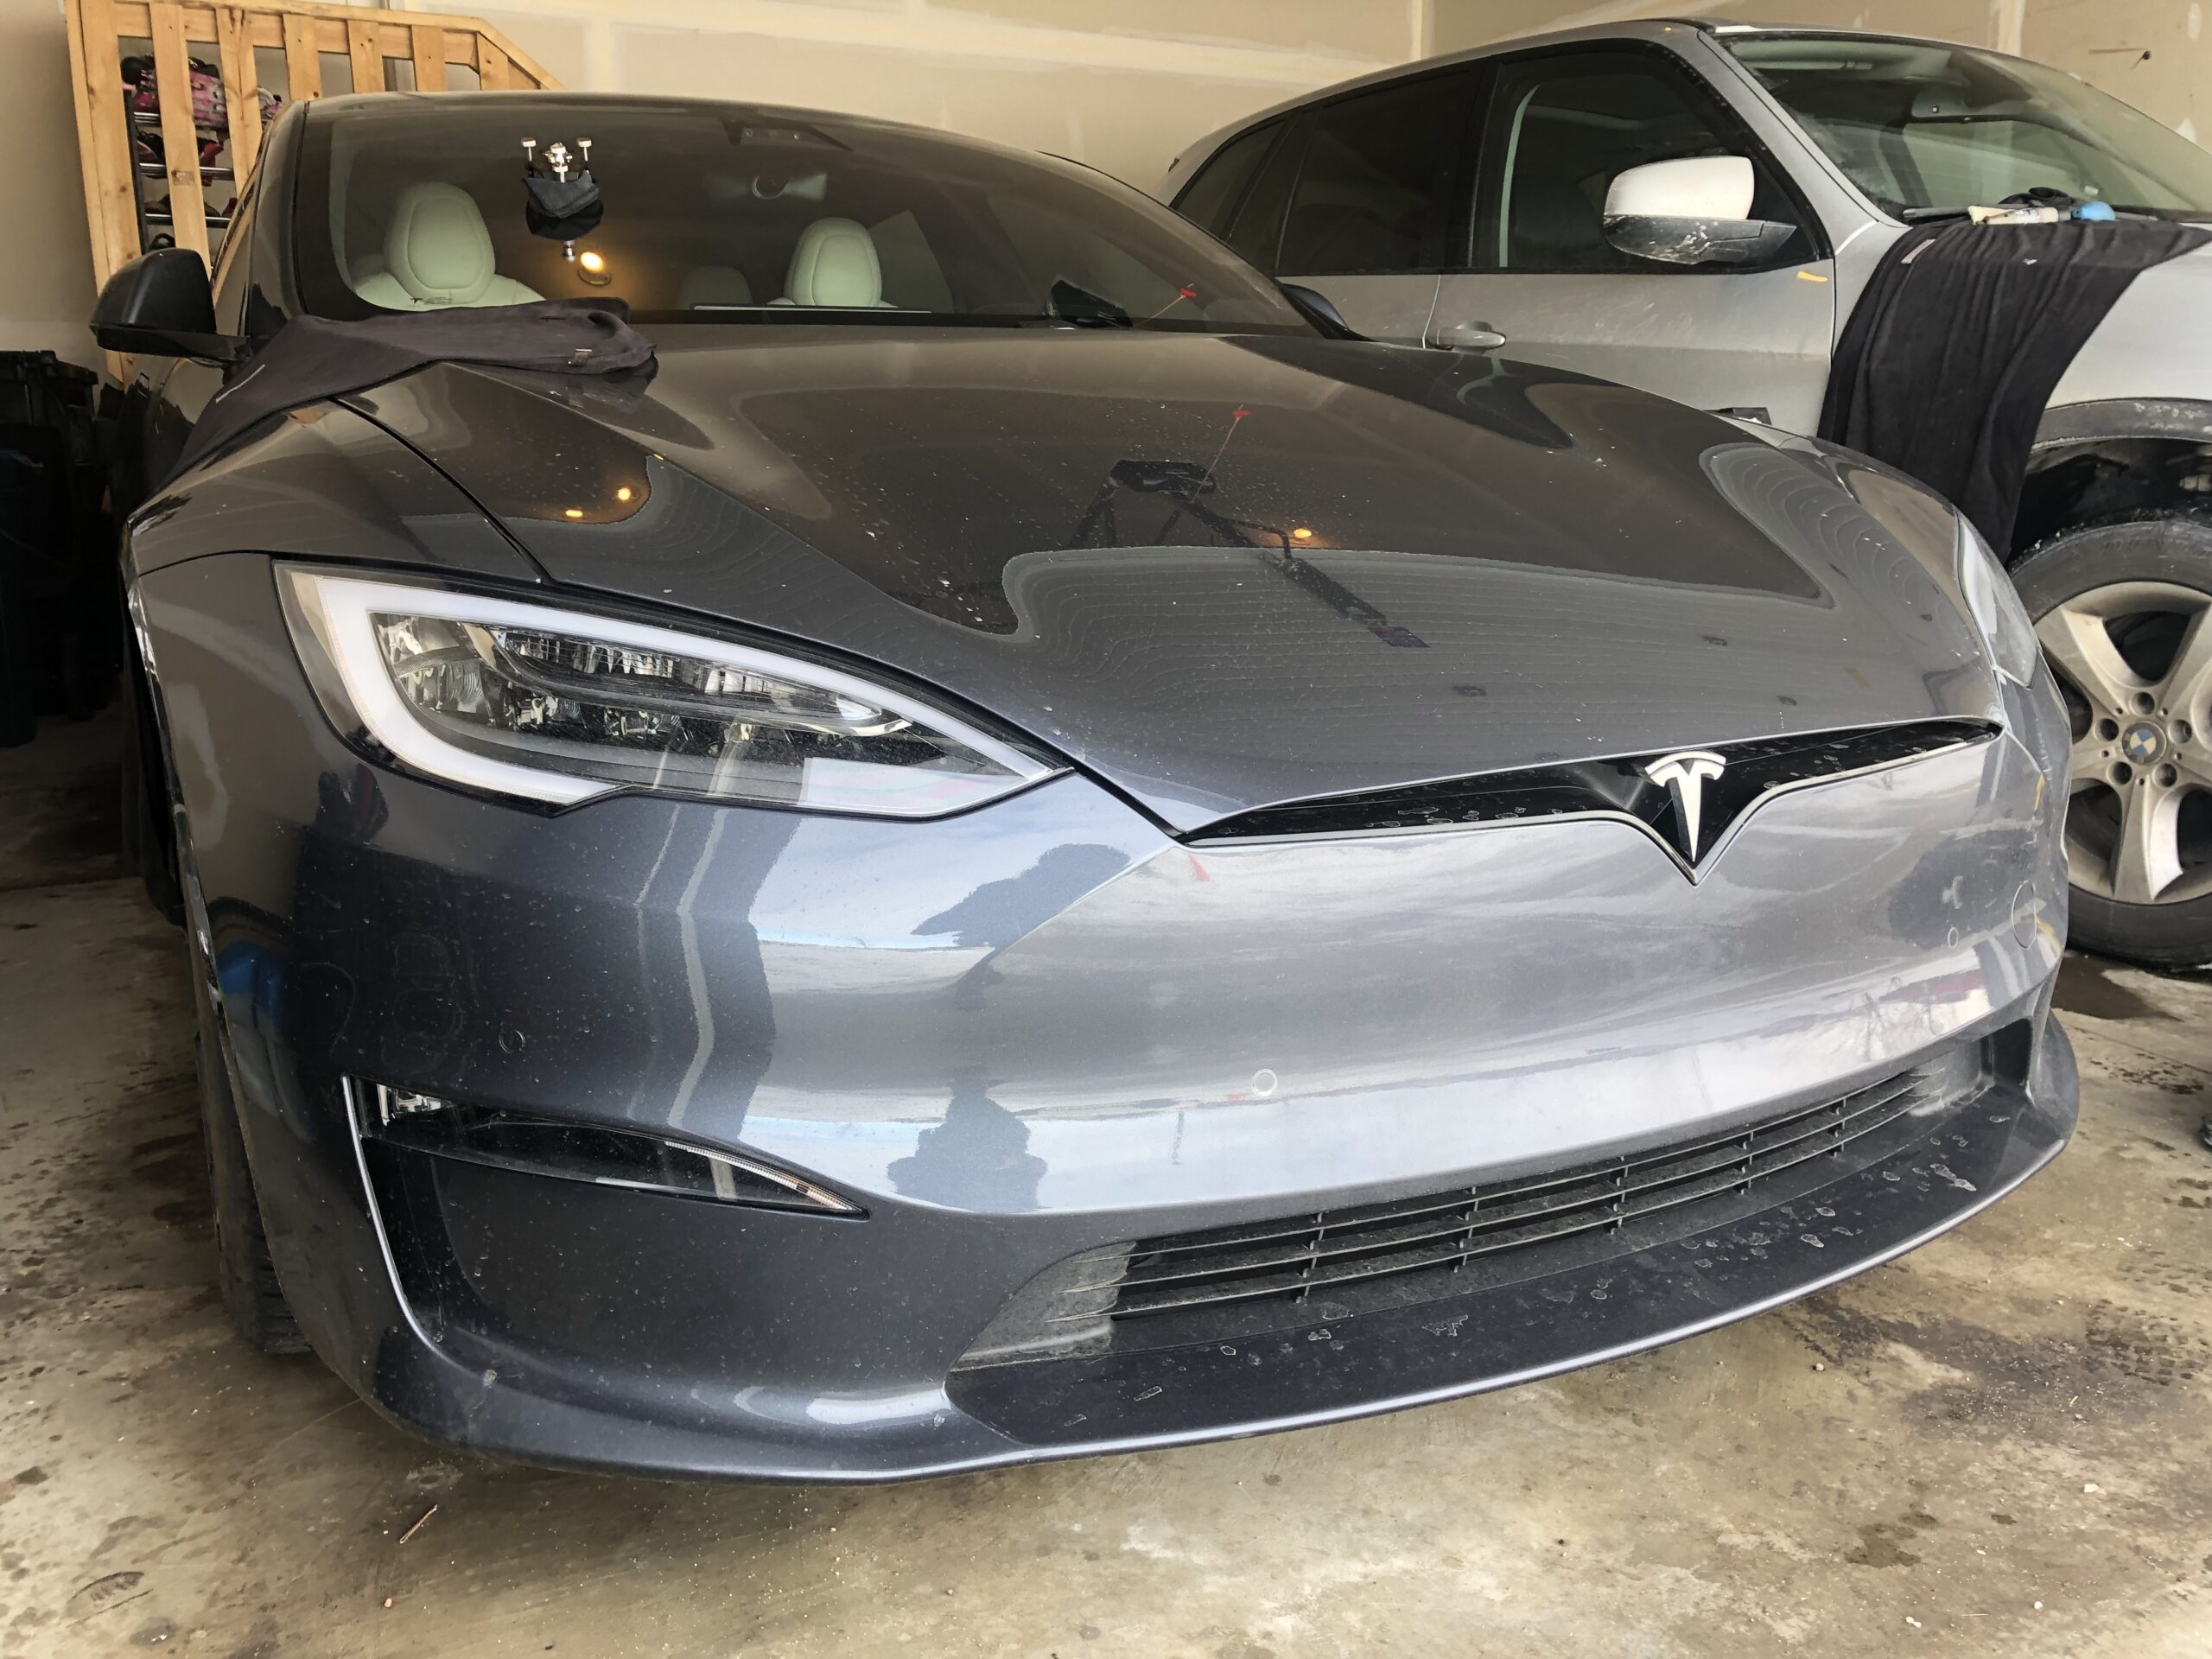 windshield repair for a gray tesla model s